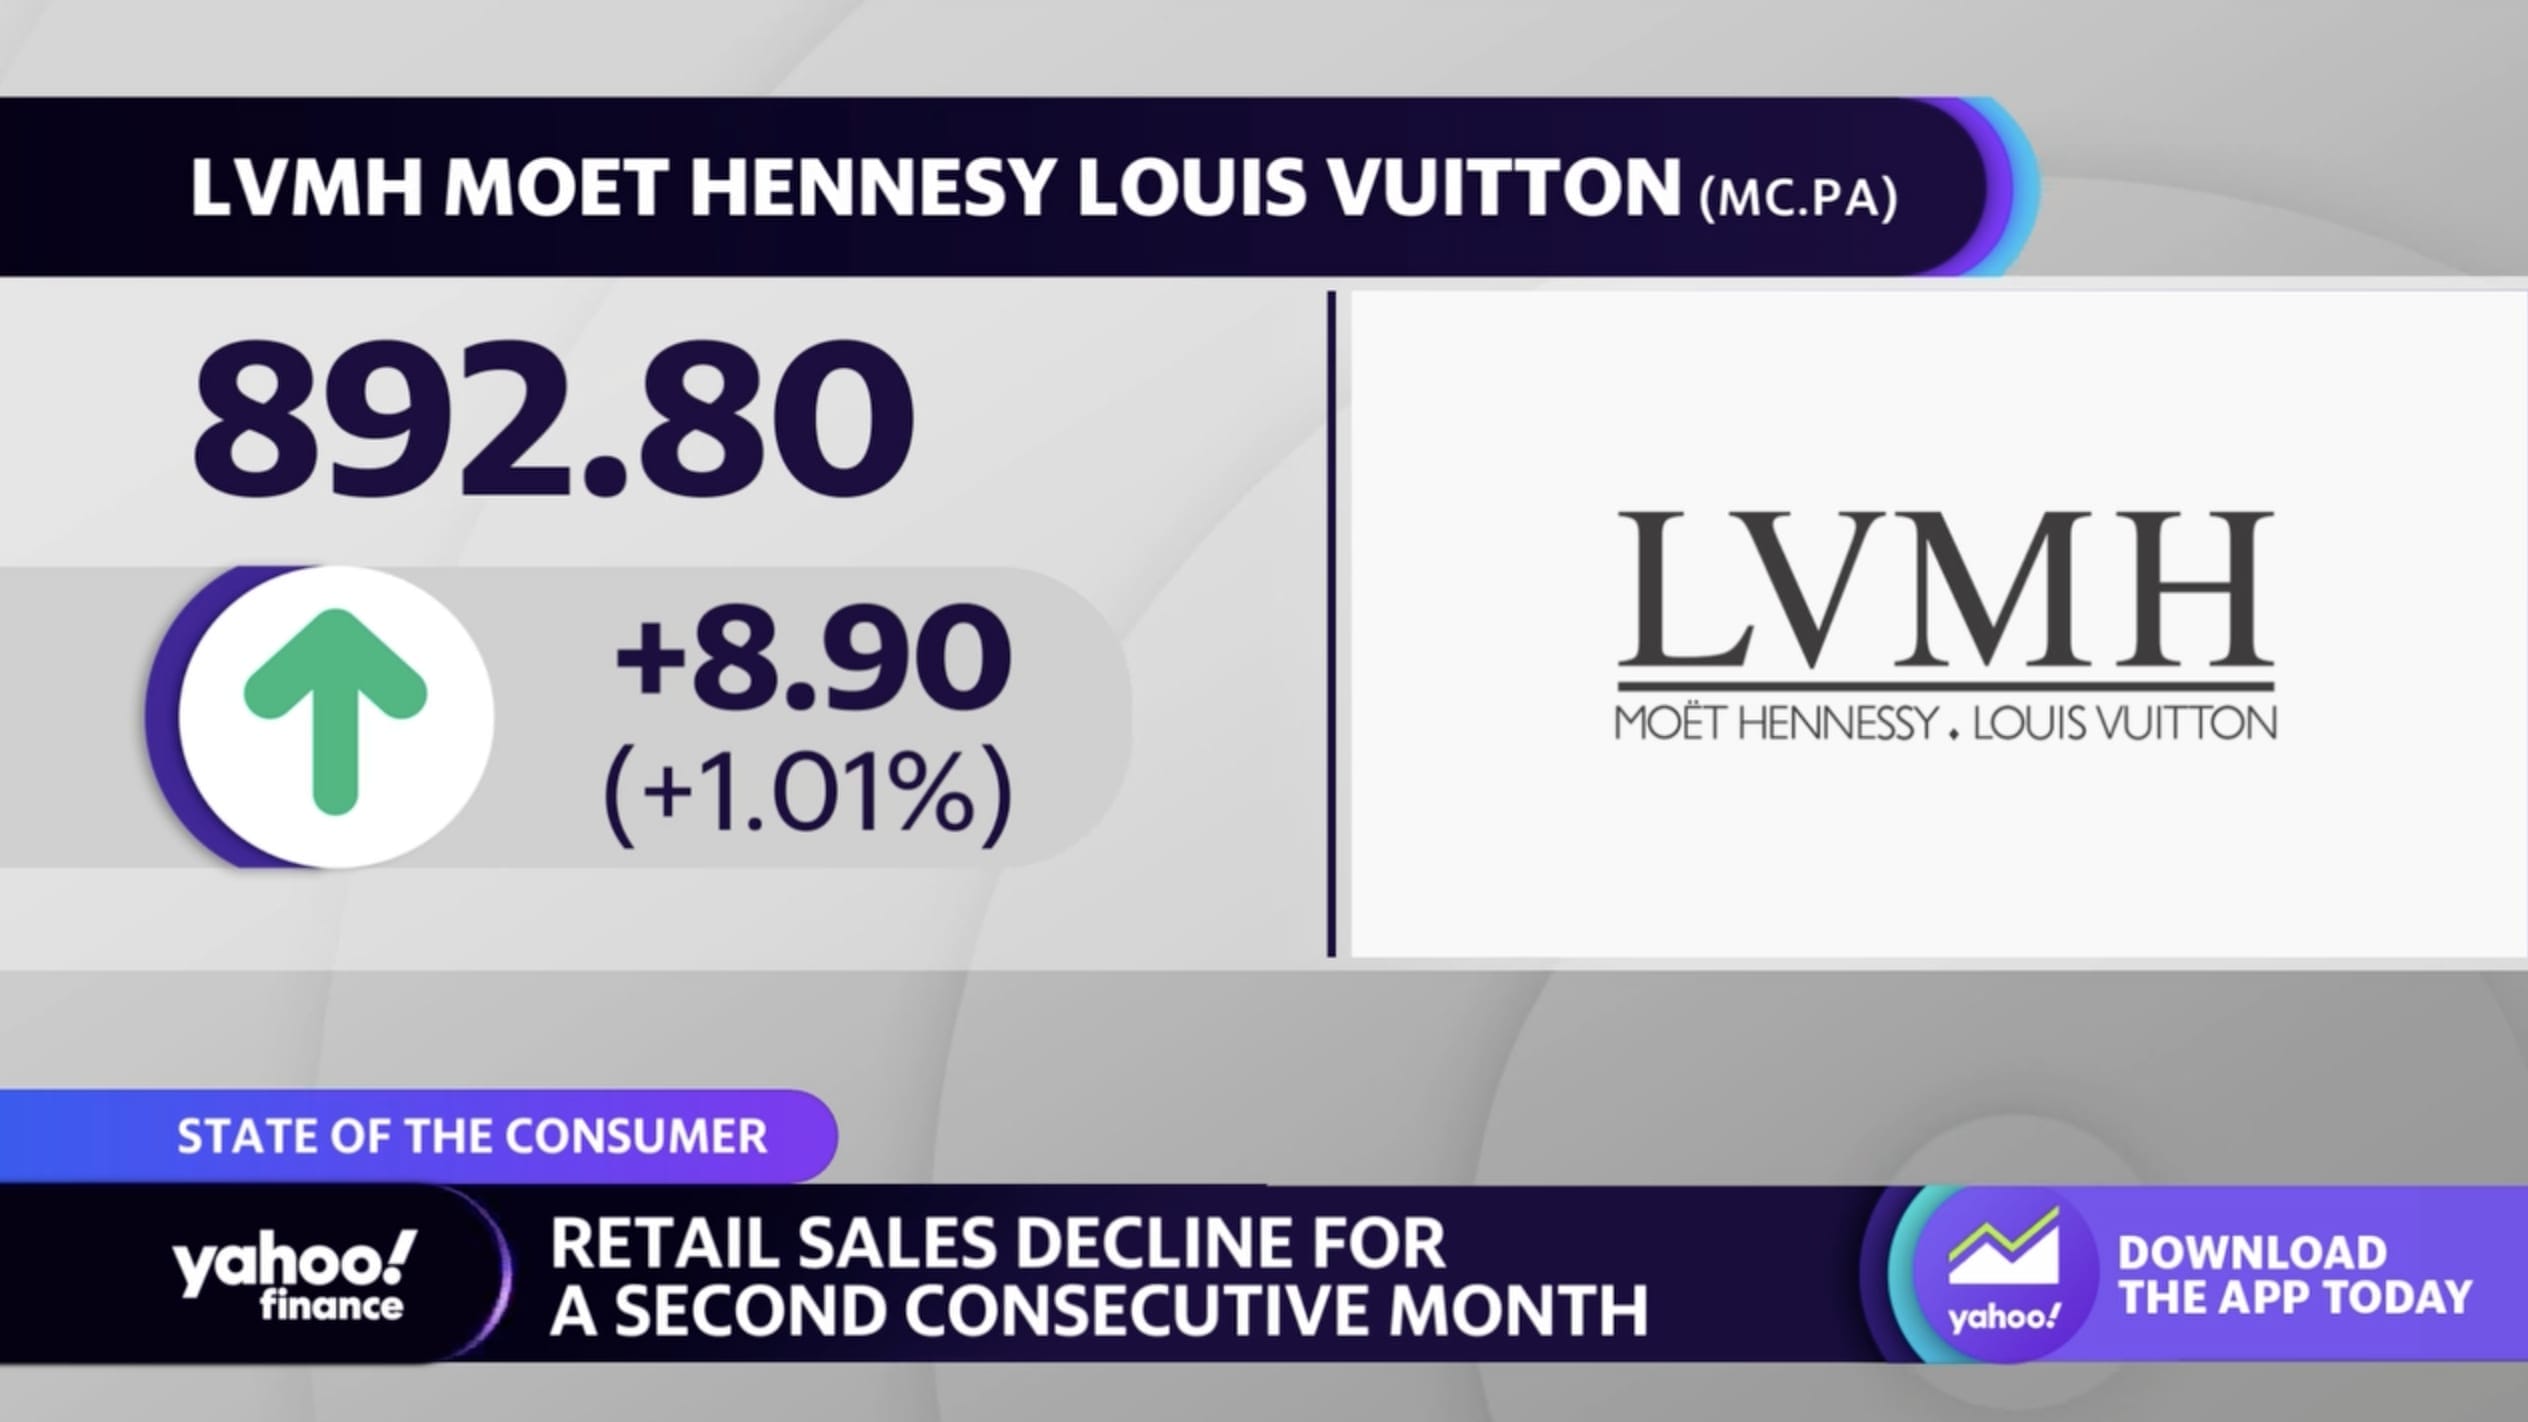 LVMH has pricing power to counter inflation, but must be